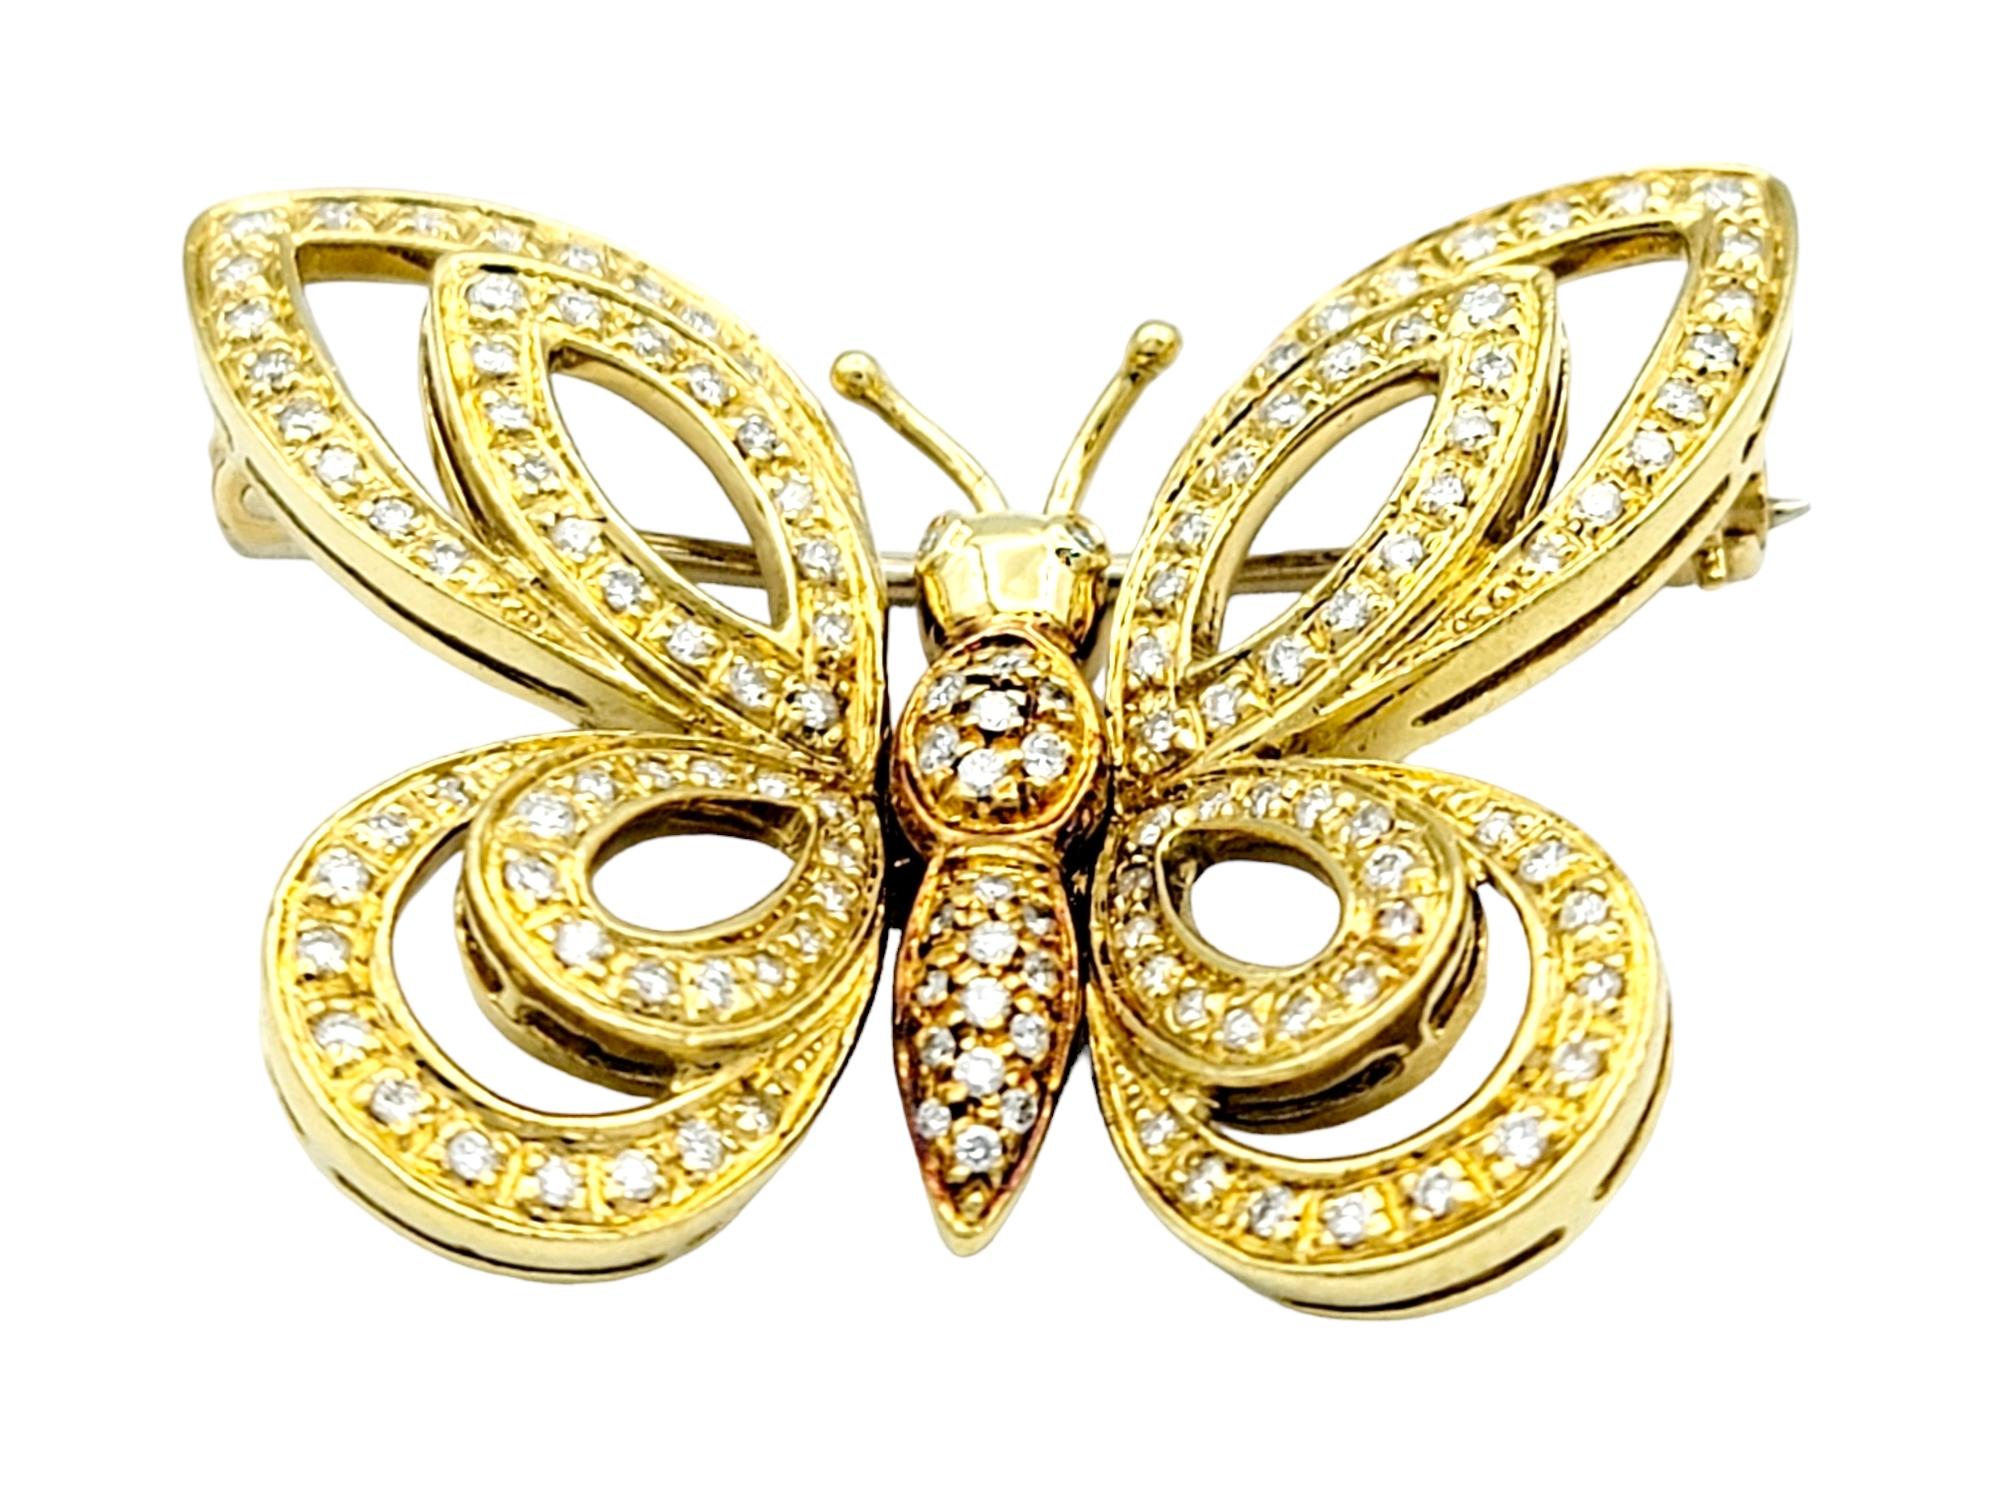 Introducing an enchanting diamond butterfly brooch, a masterpiece that gracefully captures the delicate beauty of nature. We love how this exquisite piece marries the warmth of yellow and rose gold, creating a captivating symphony of hues.

The